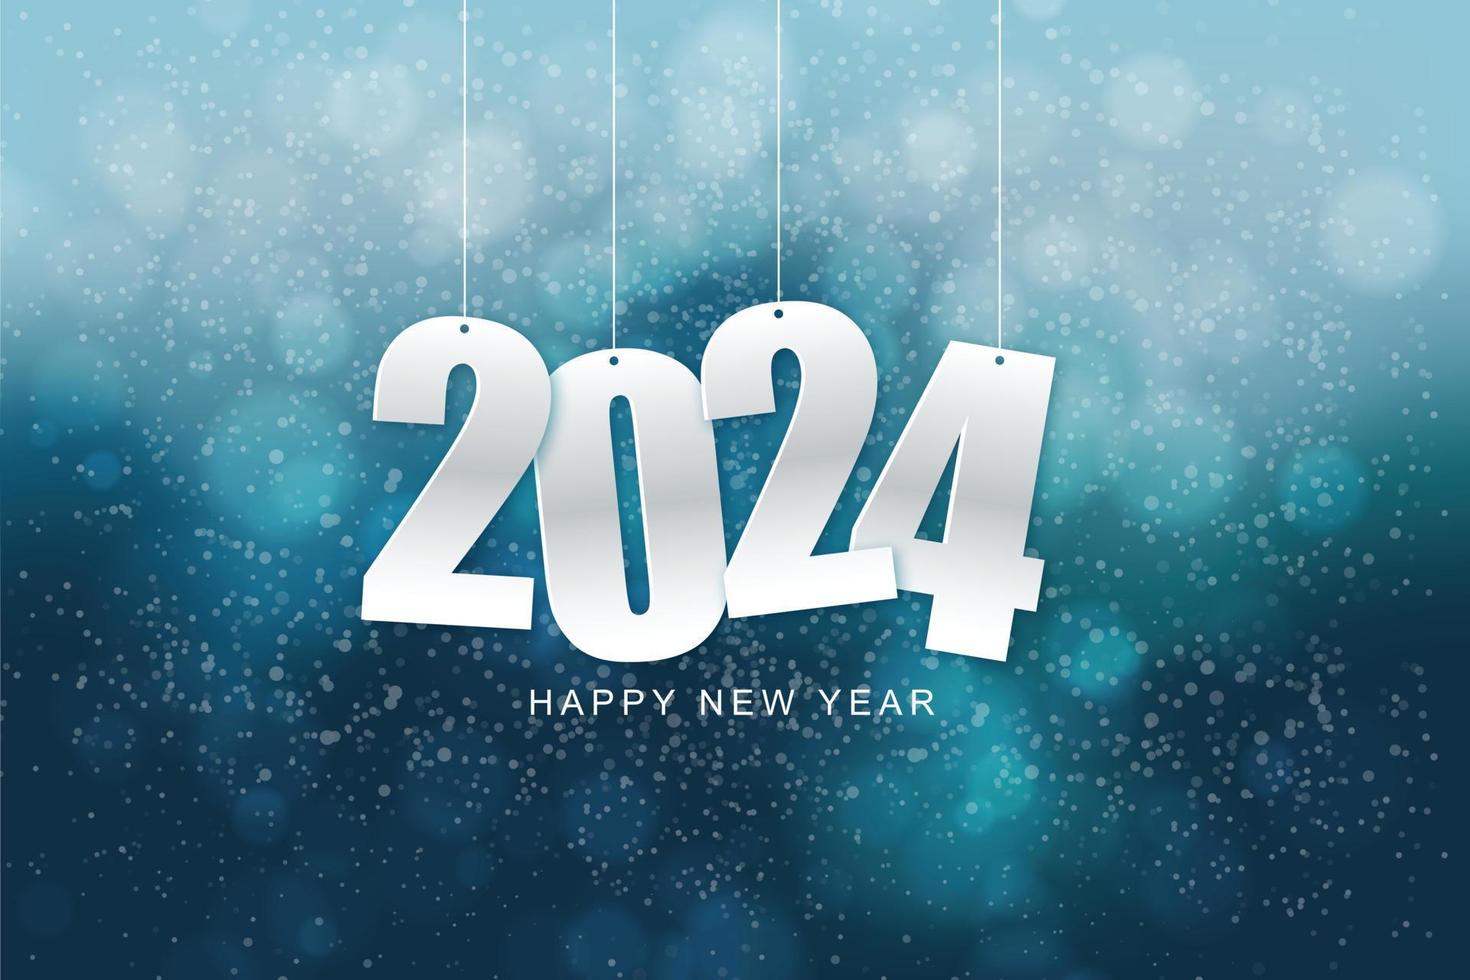 Happy New Year 2024 Hanging White Paper Number With Confetti On A Colorful Blurry Background Illustration For The Festive New Year 2024 Vector 